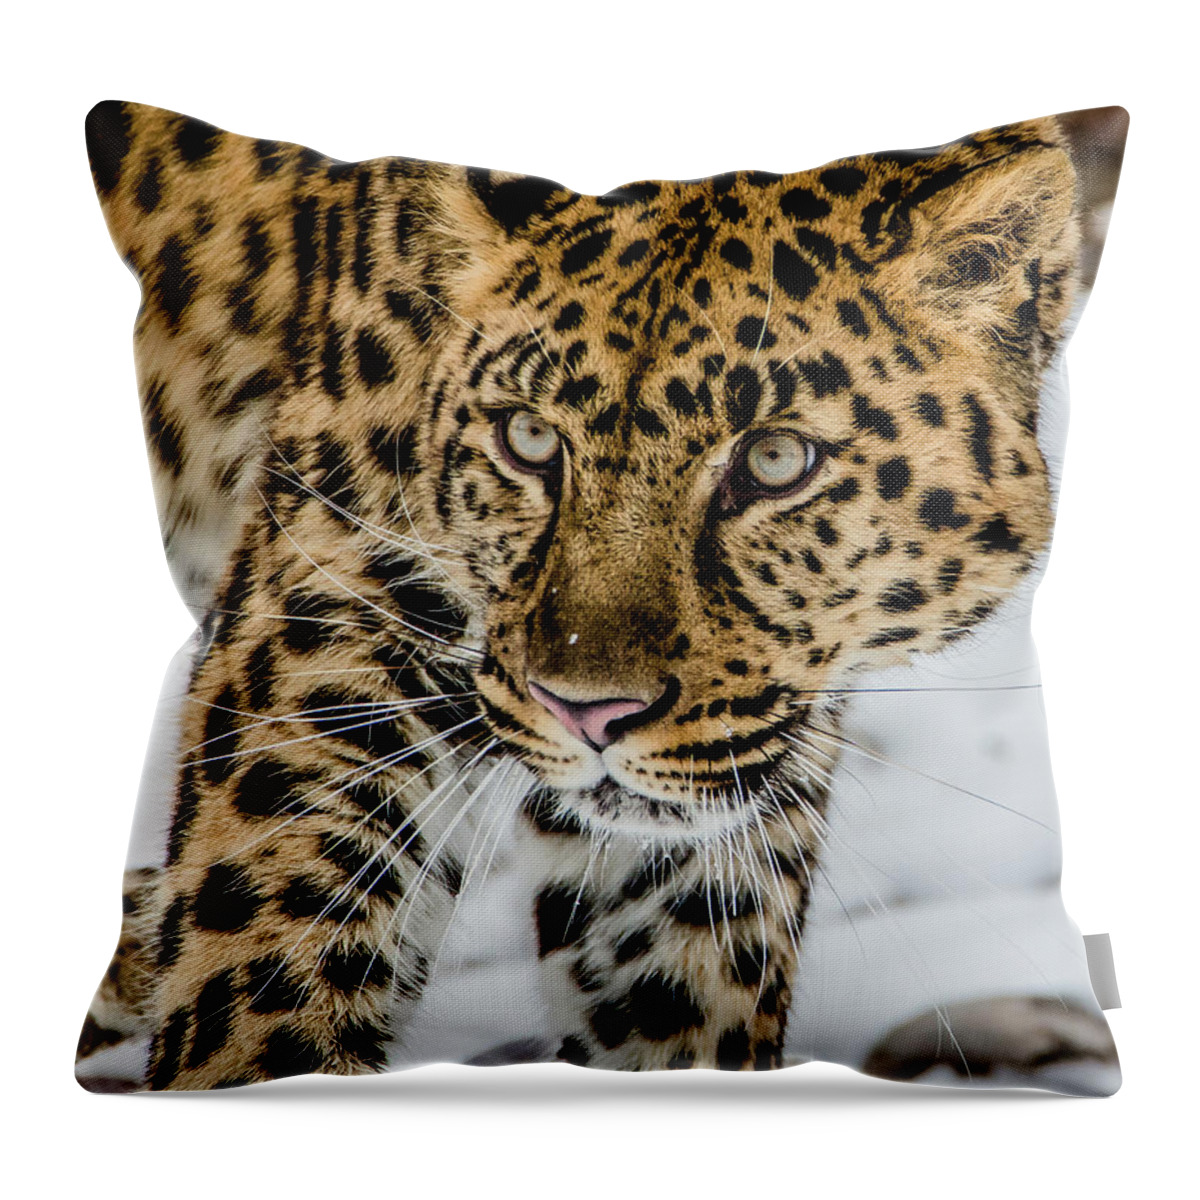 Amur Leopard Throw Pillow featuring the photograph The Look by Teresa Wilson